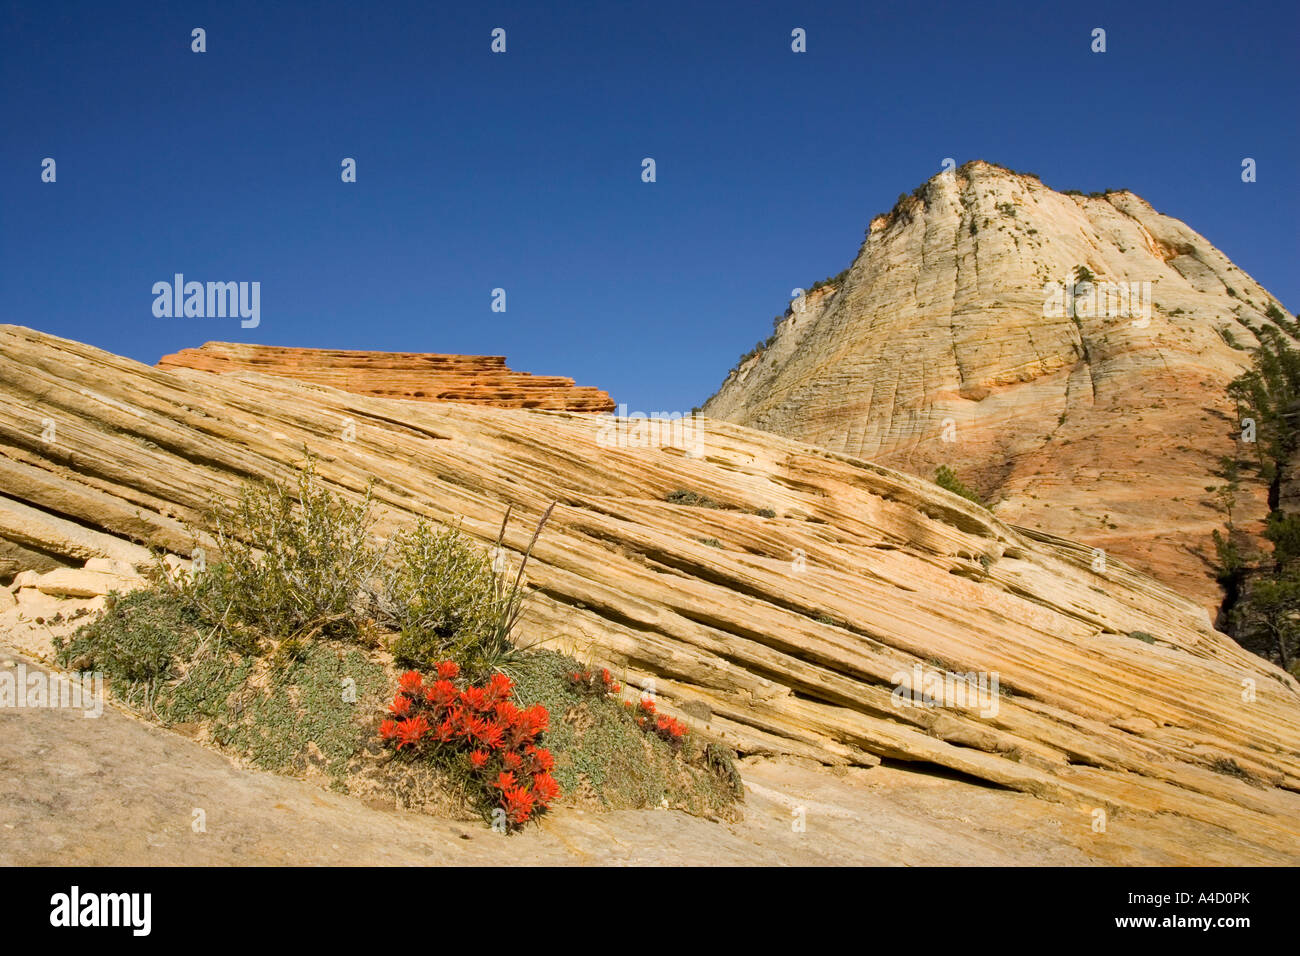 Flowering Zion Slickrock Paintbrush (Castilleja scabrida) against the background of the Checkerboard Mesa, Stock Photo